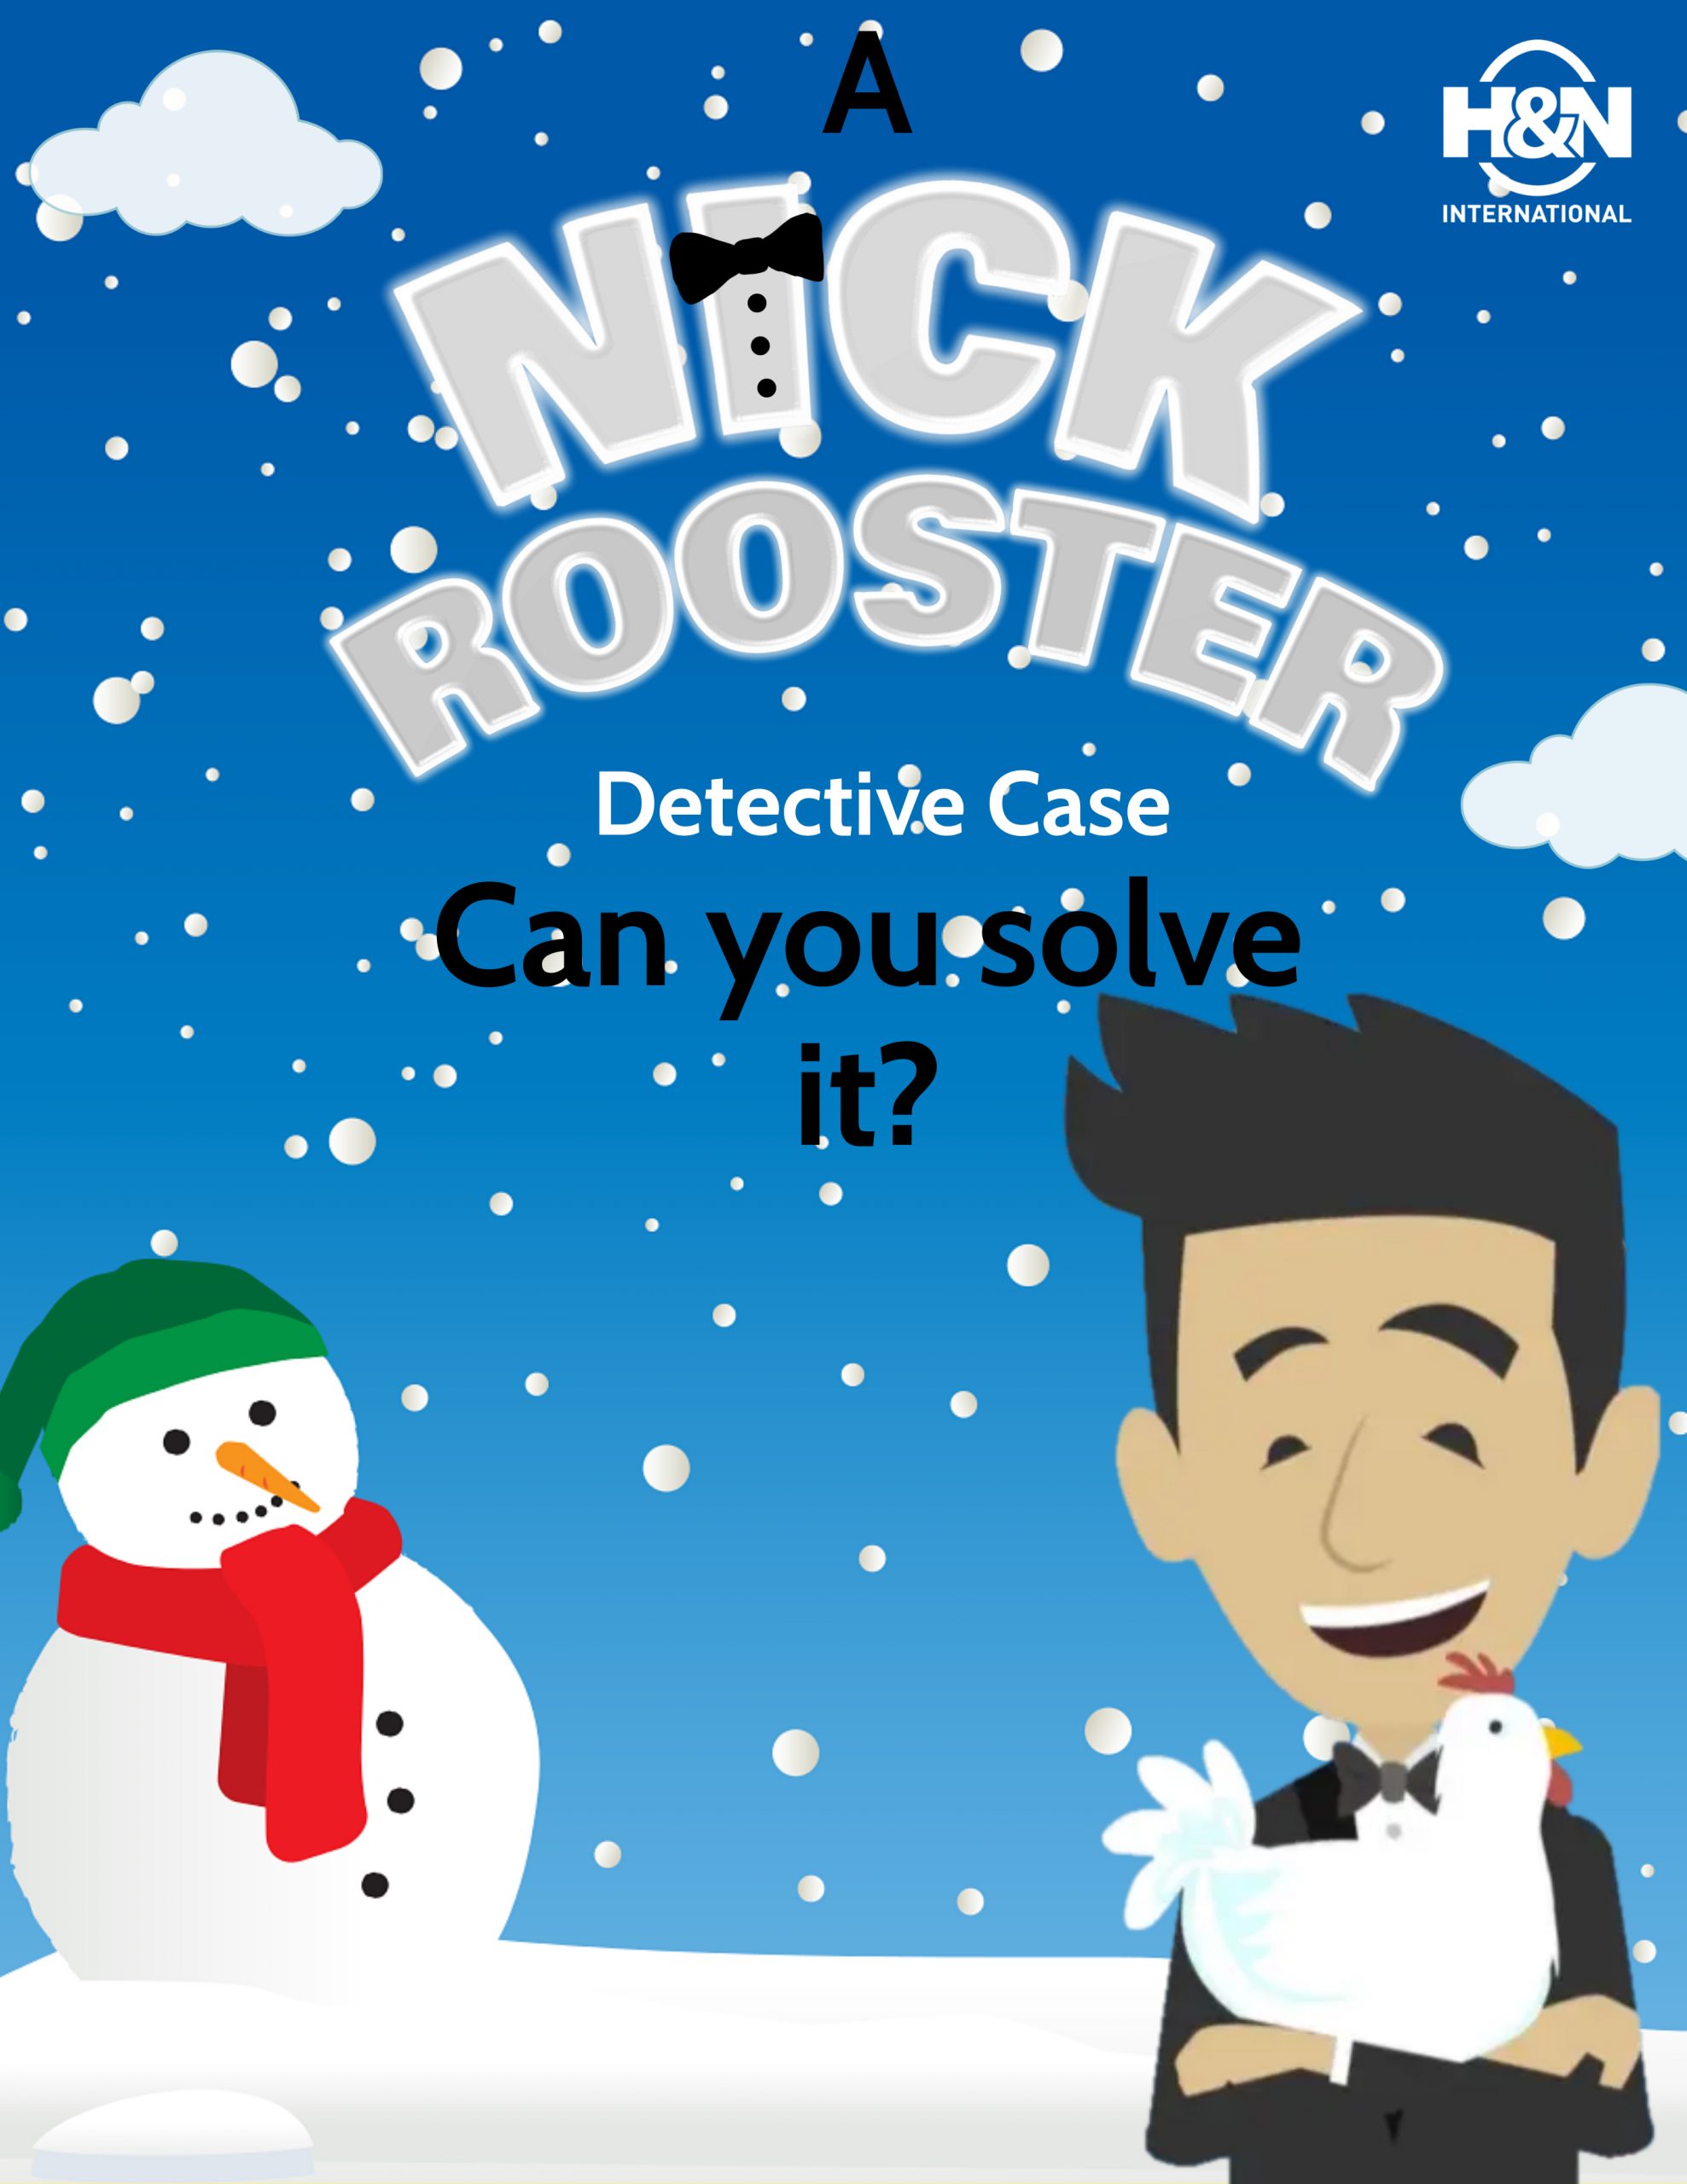 Nick Rooster case no. 6